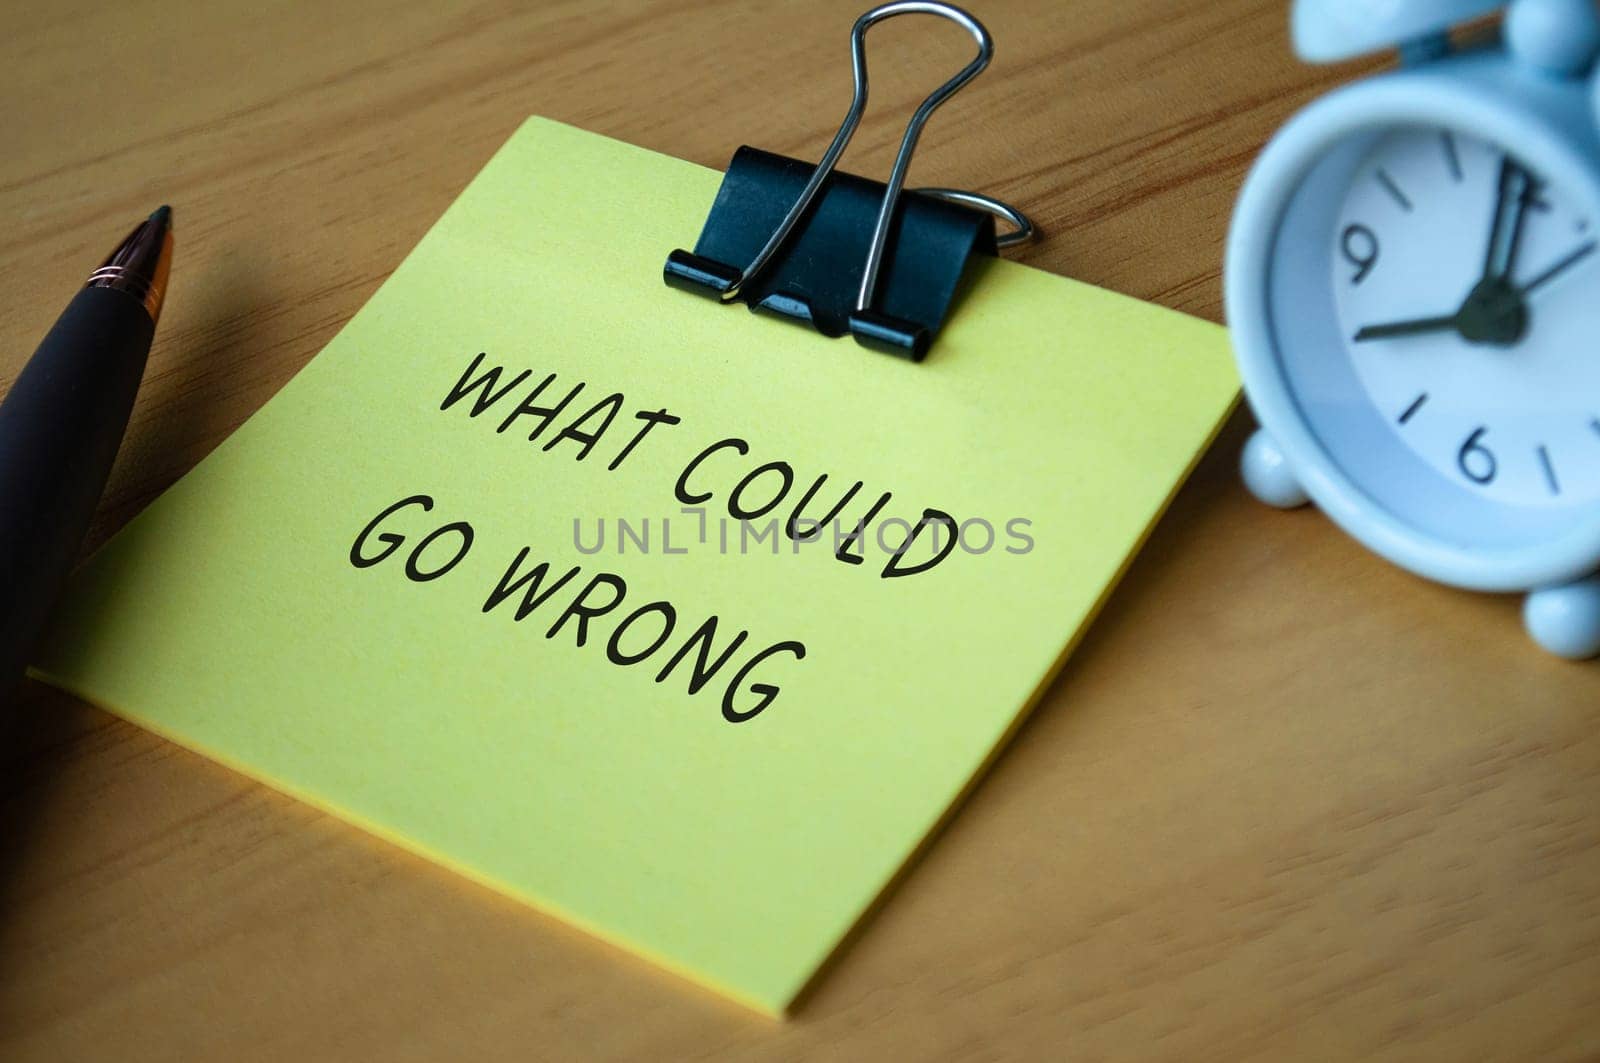 What could go wrong text on sticky note with alarm clock background.